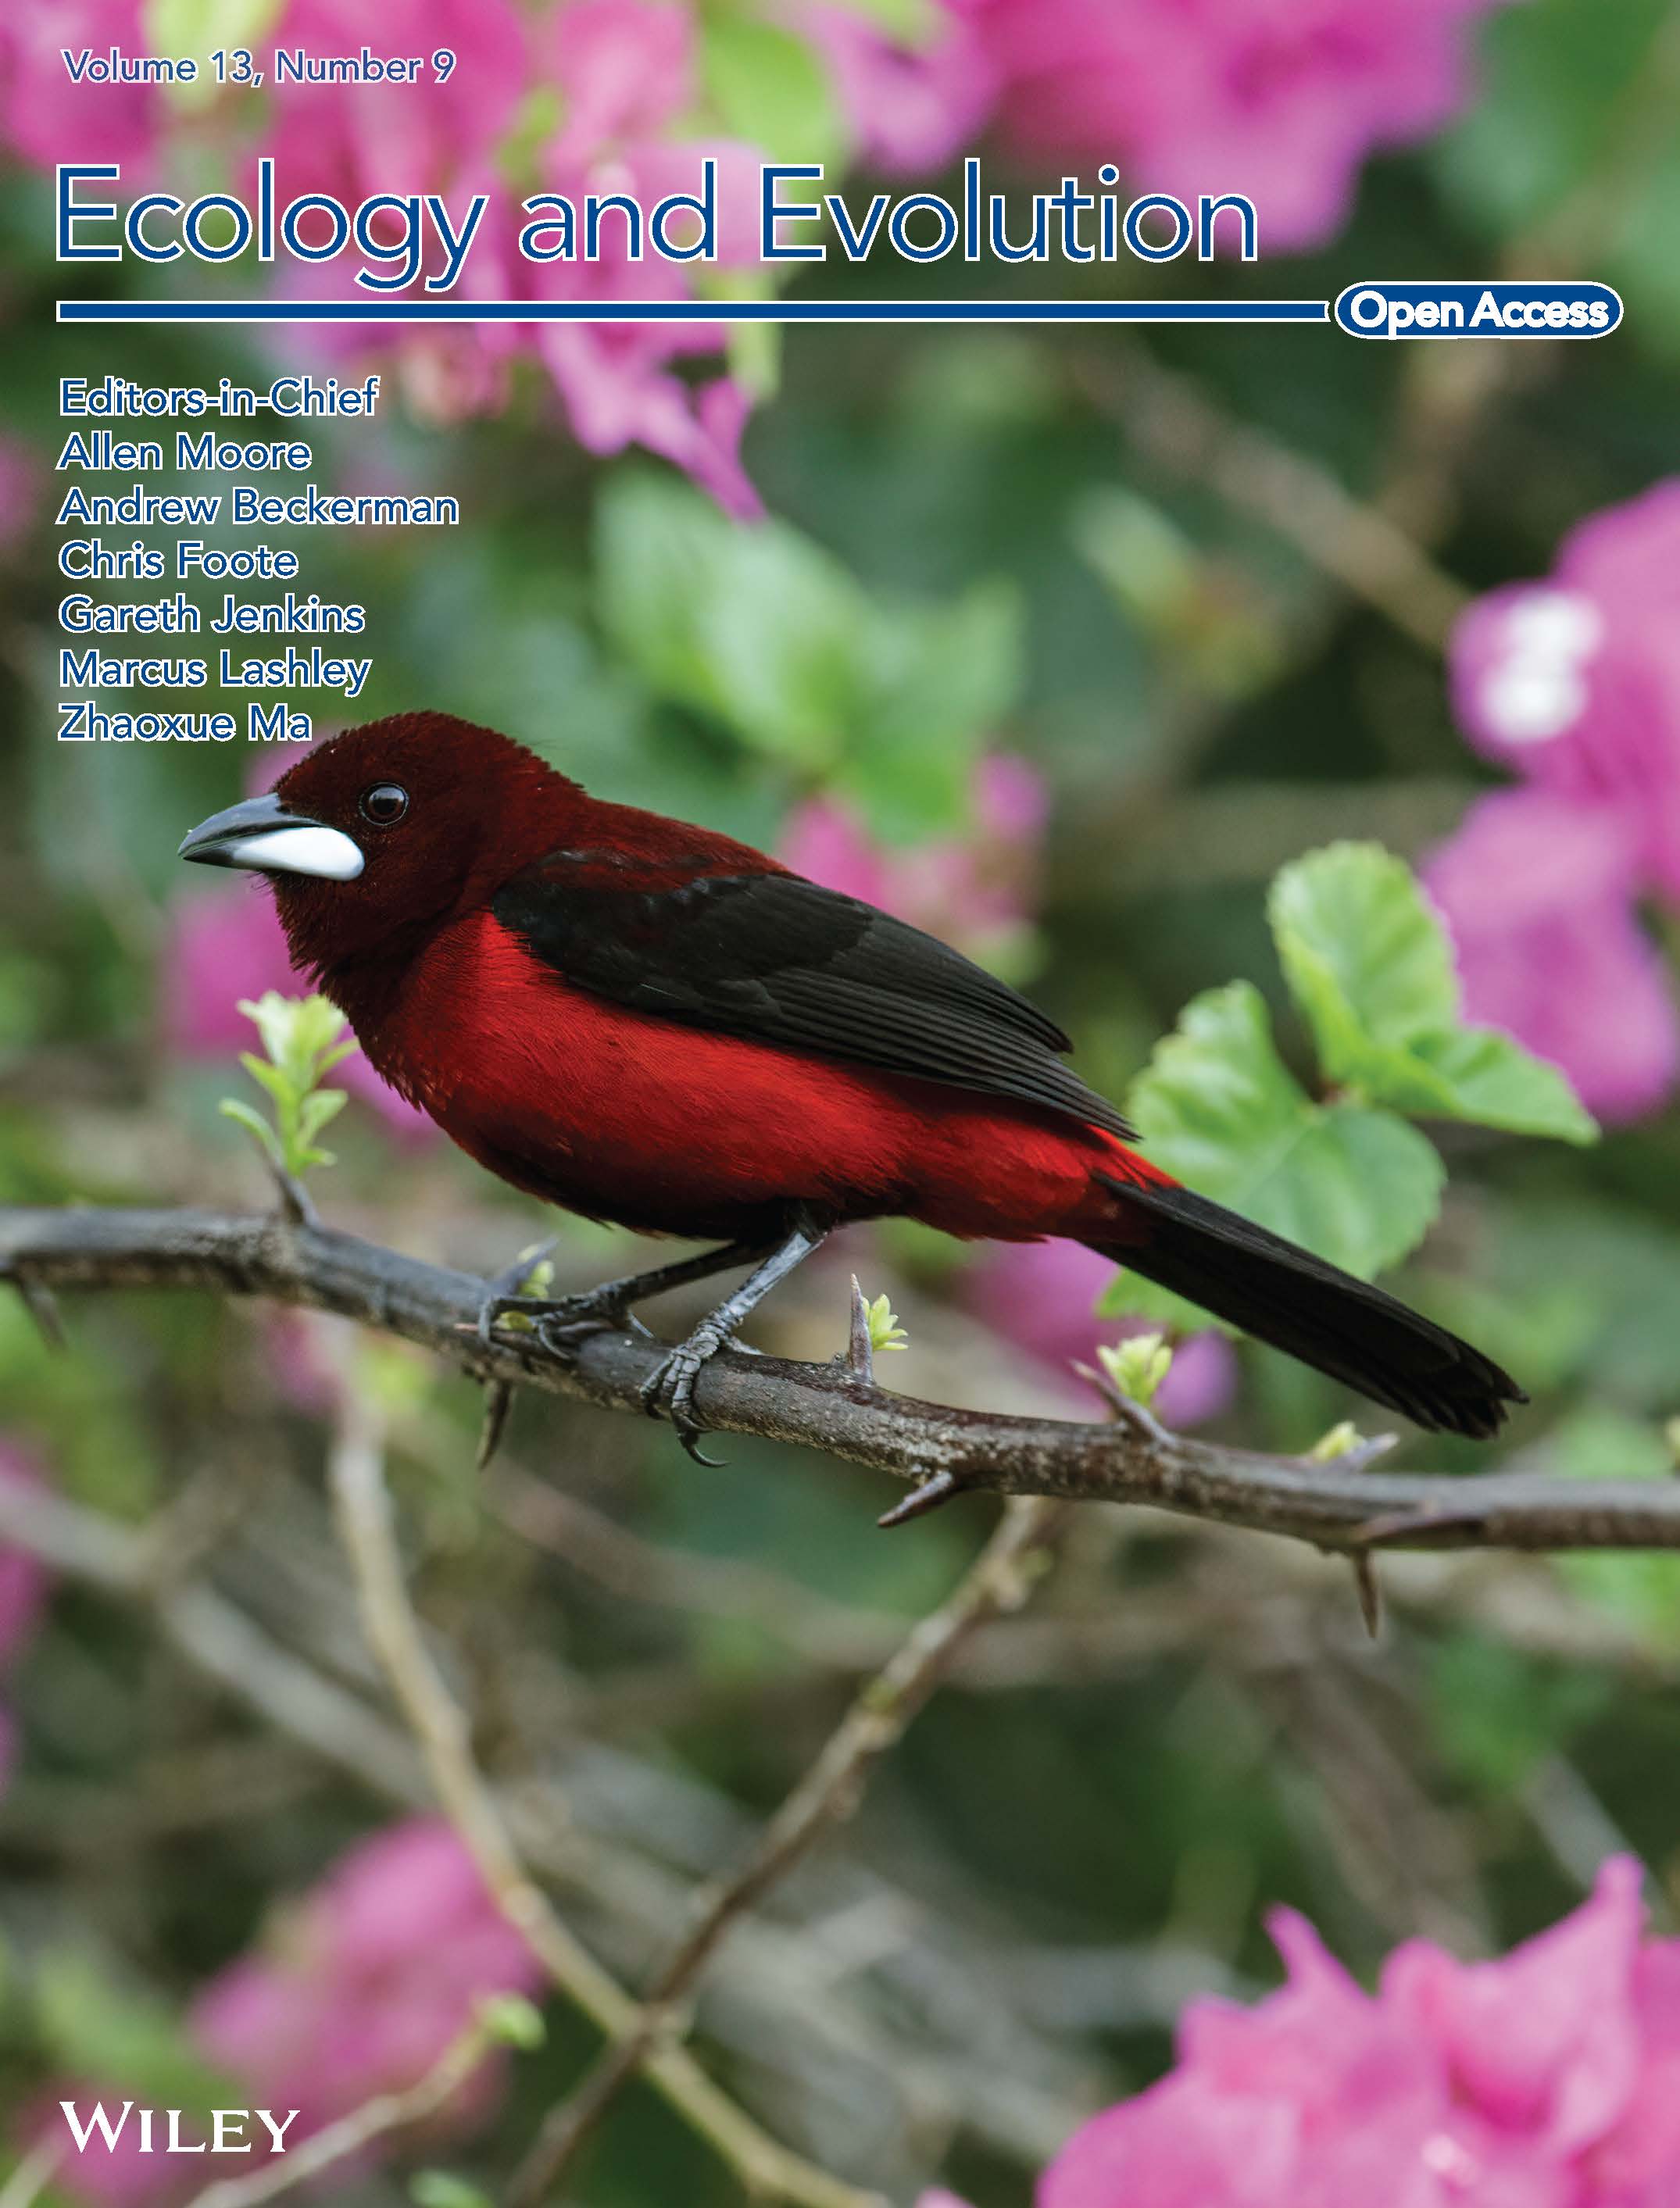 Cover photo of tanager with carotenoid pigments